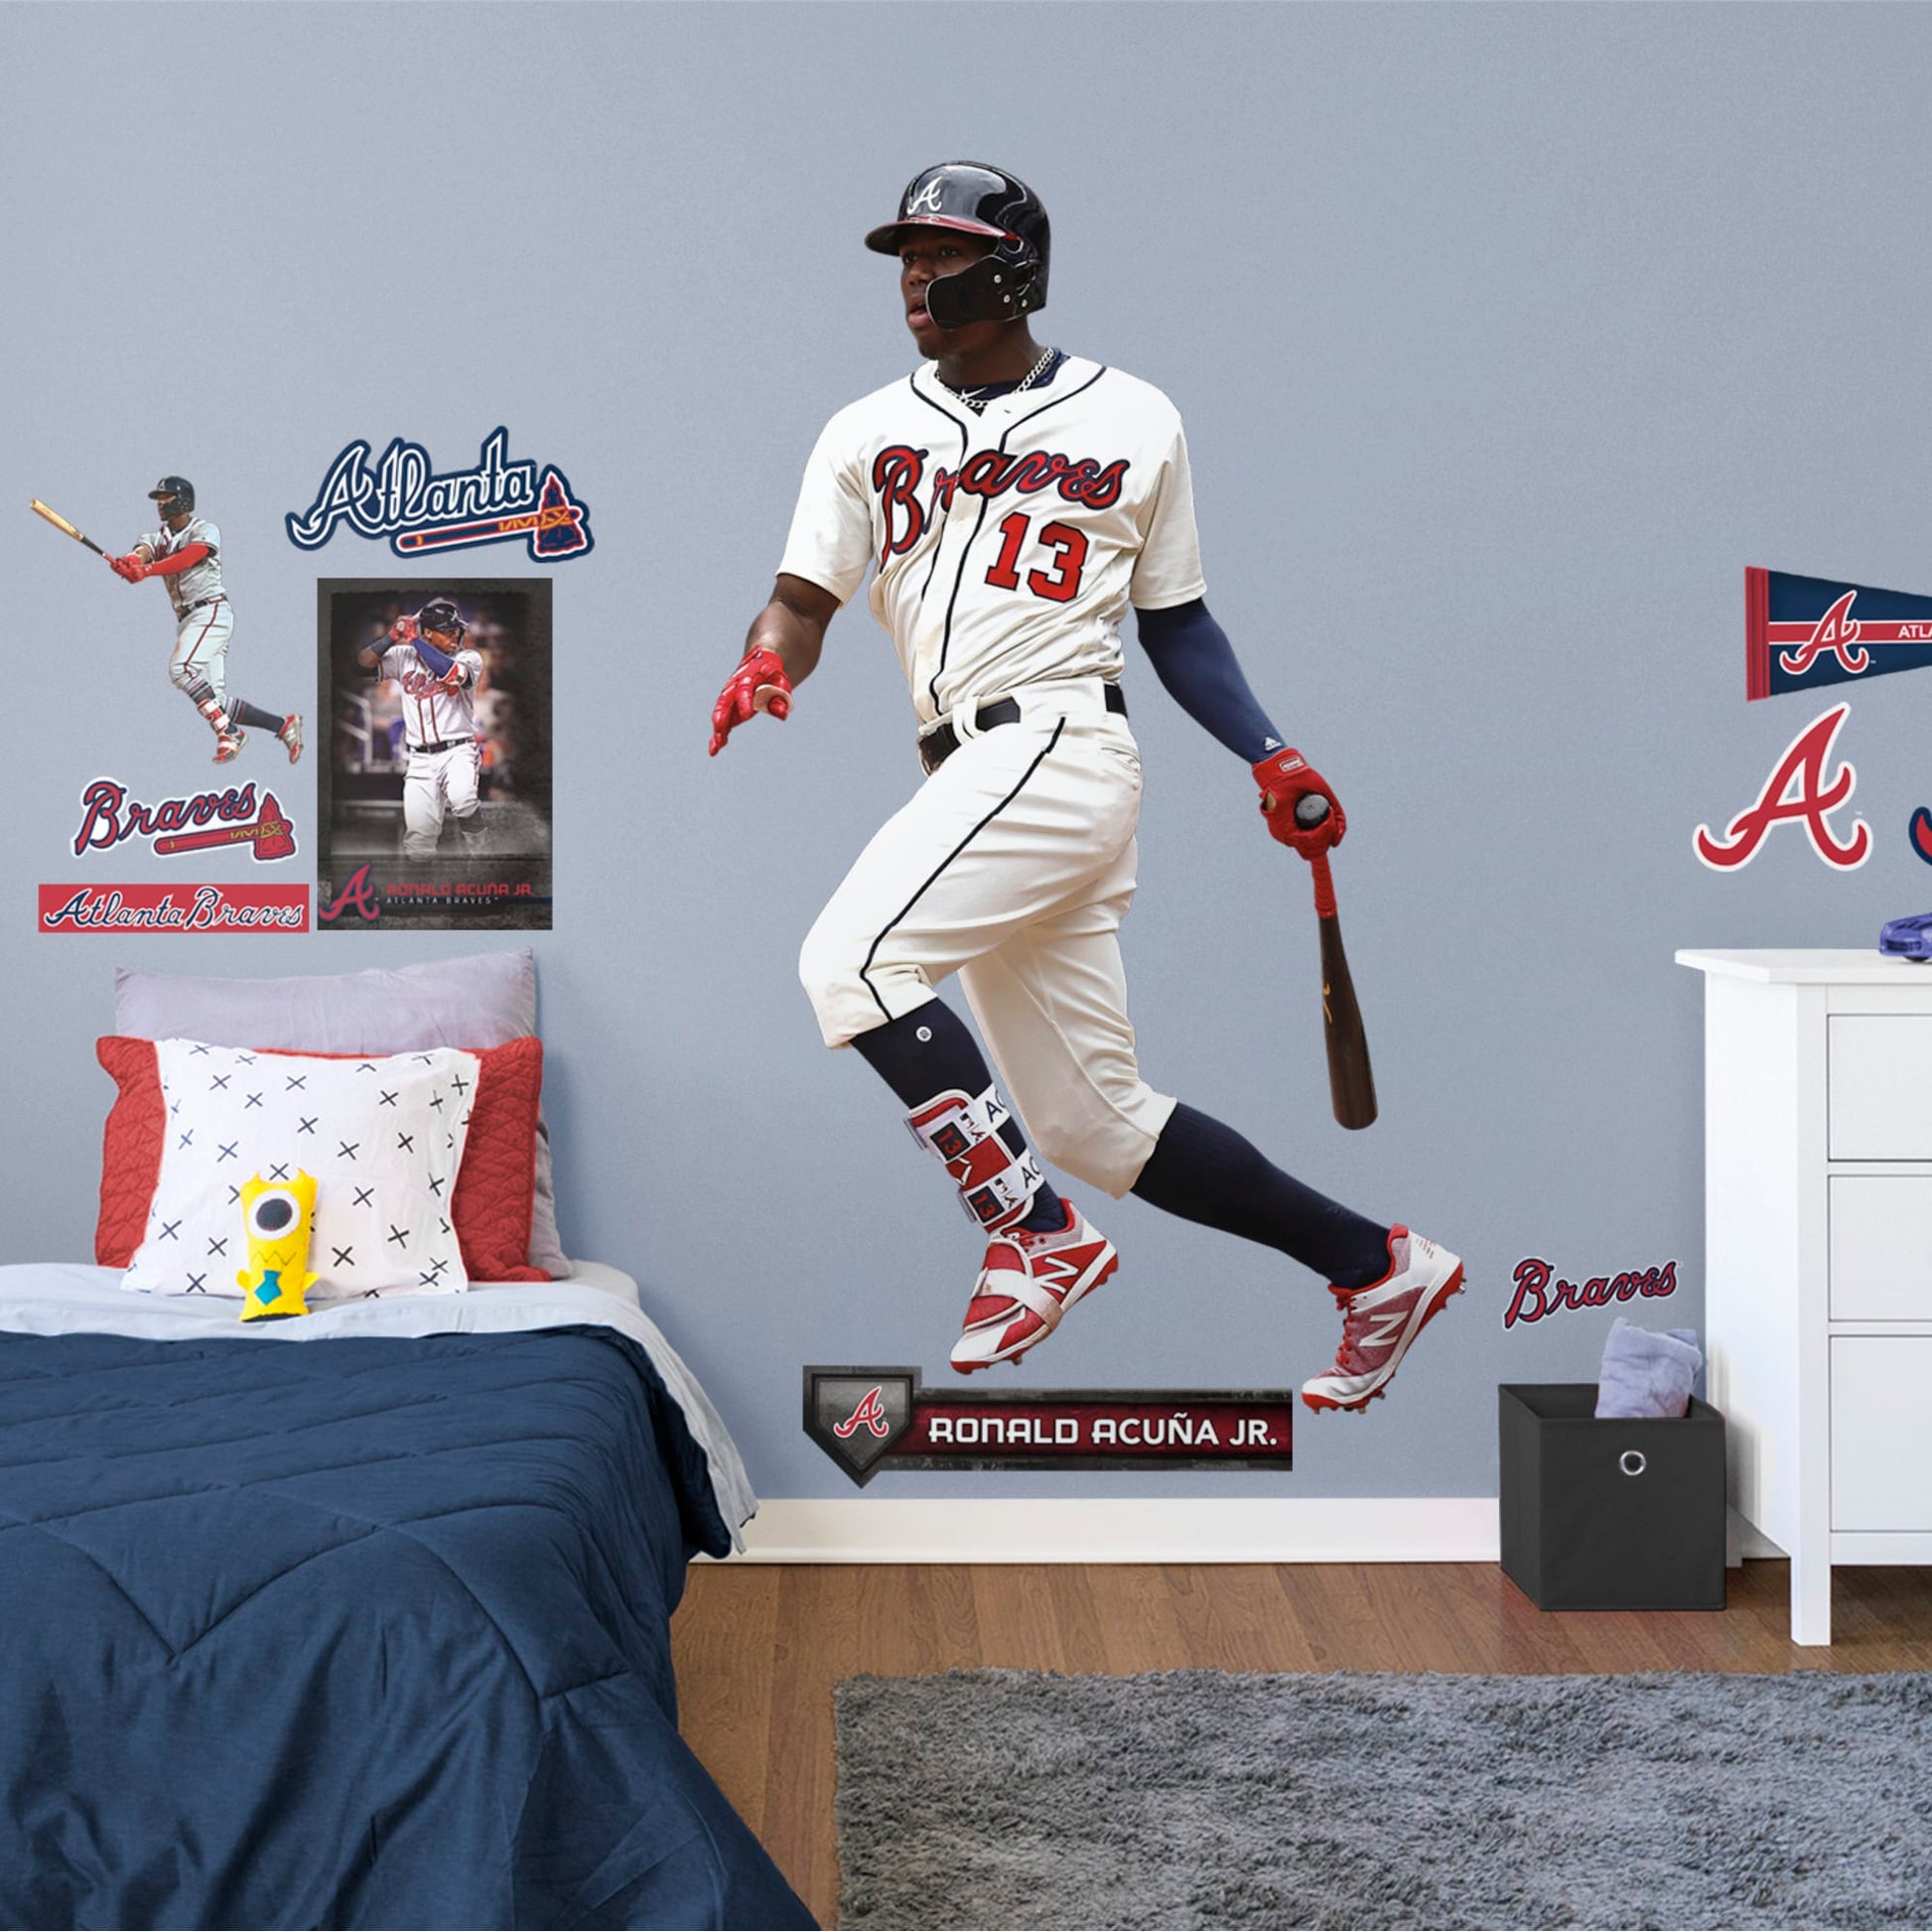 Ronald Acu��a Jr. - Officially Licensed MLB Removable Wall Decal – Fathead